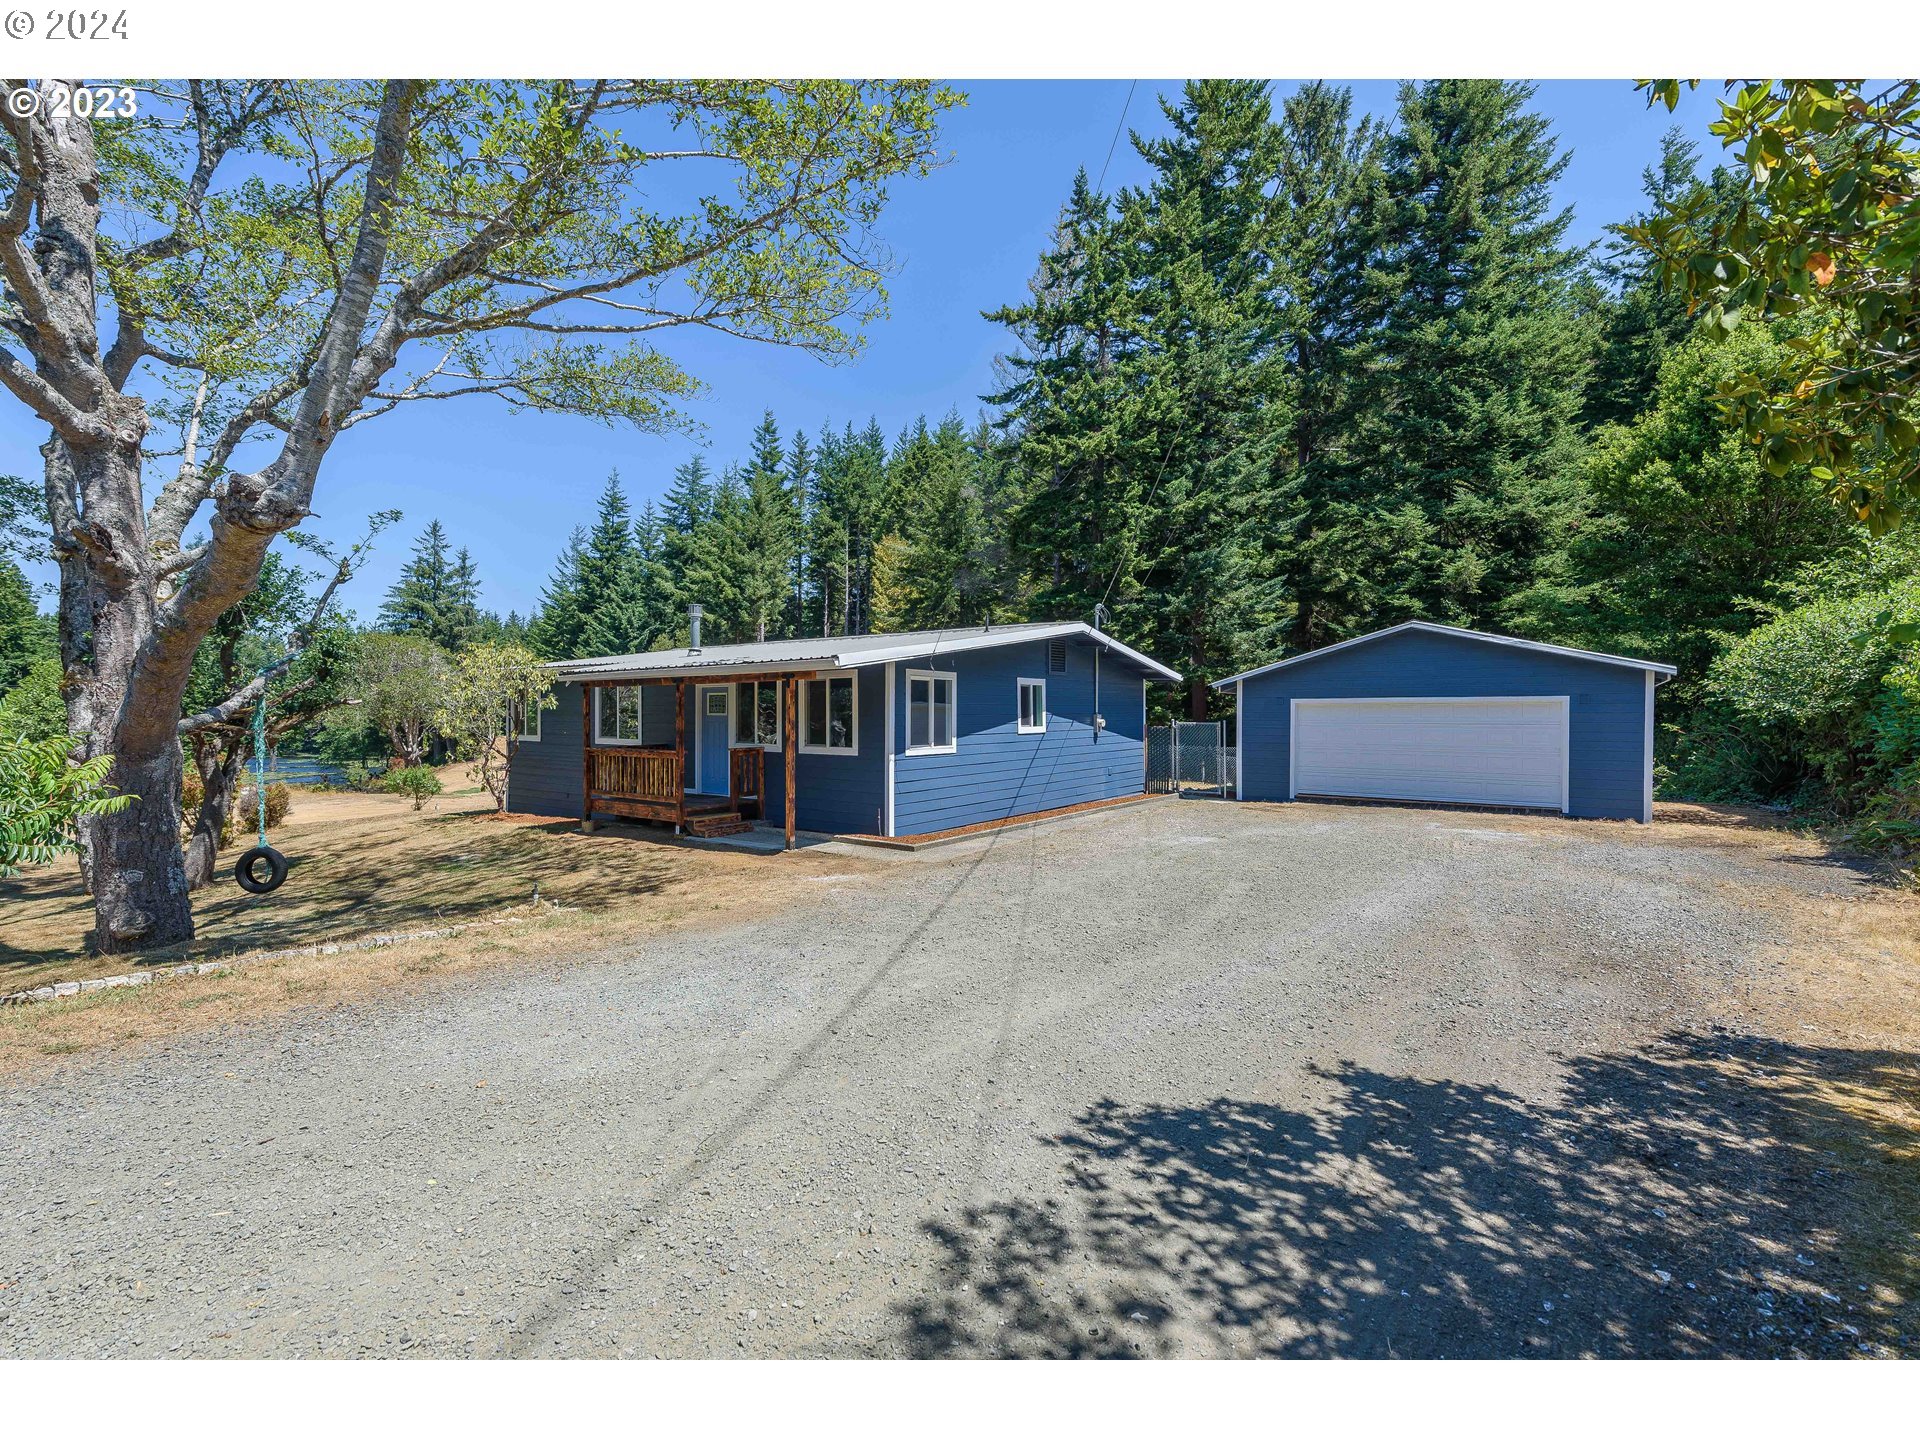 69903 RIDLING RD, North Bend, OR 